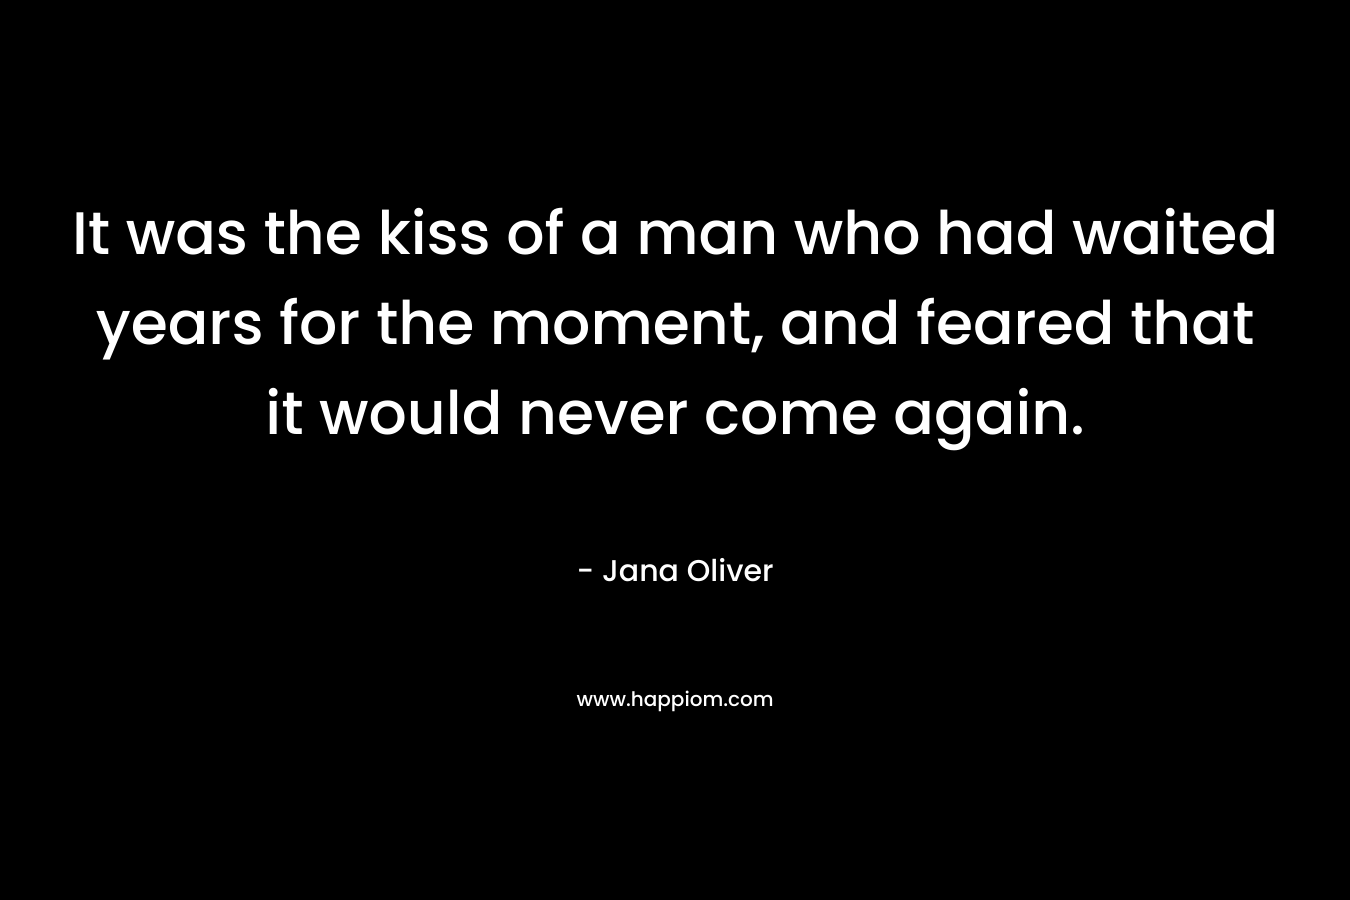 It was the kiss of a man who had waited years for the moment, and feared that it would never come again. – Jana Oliver